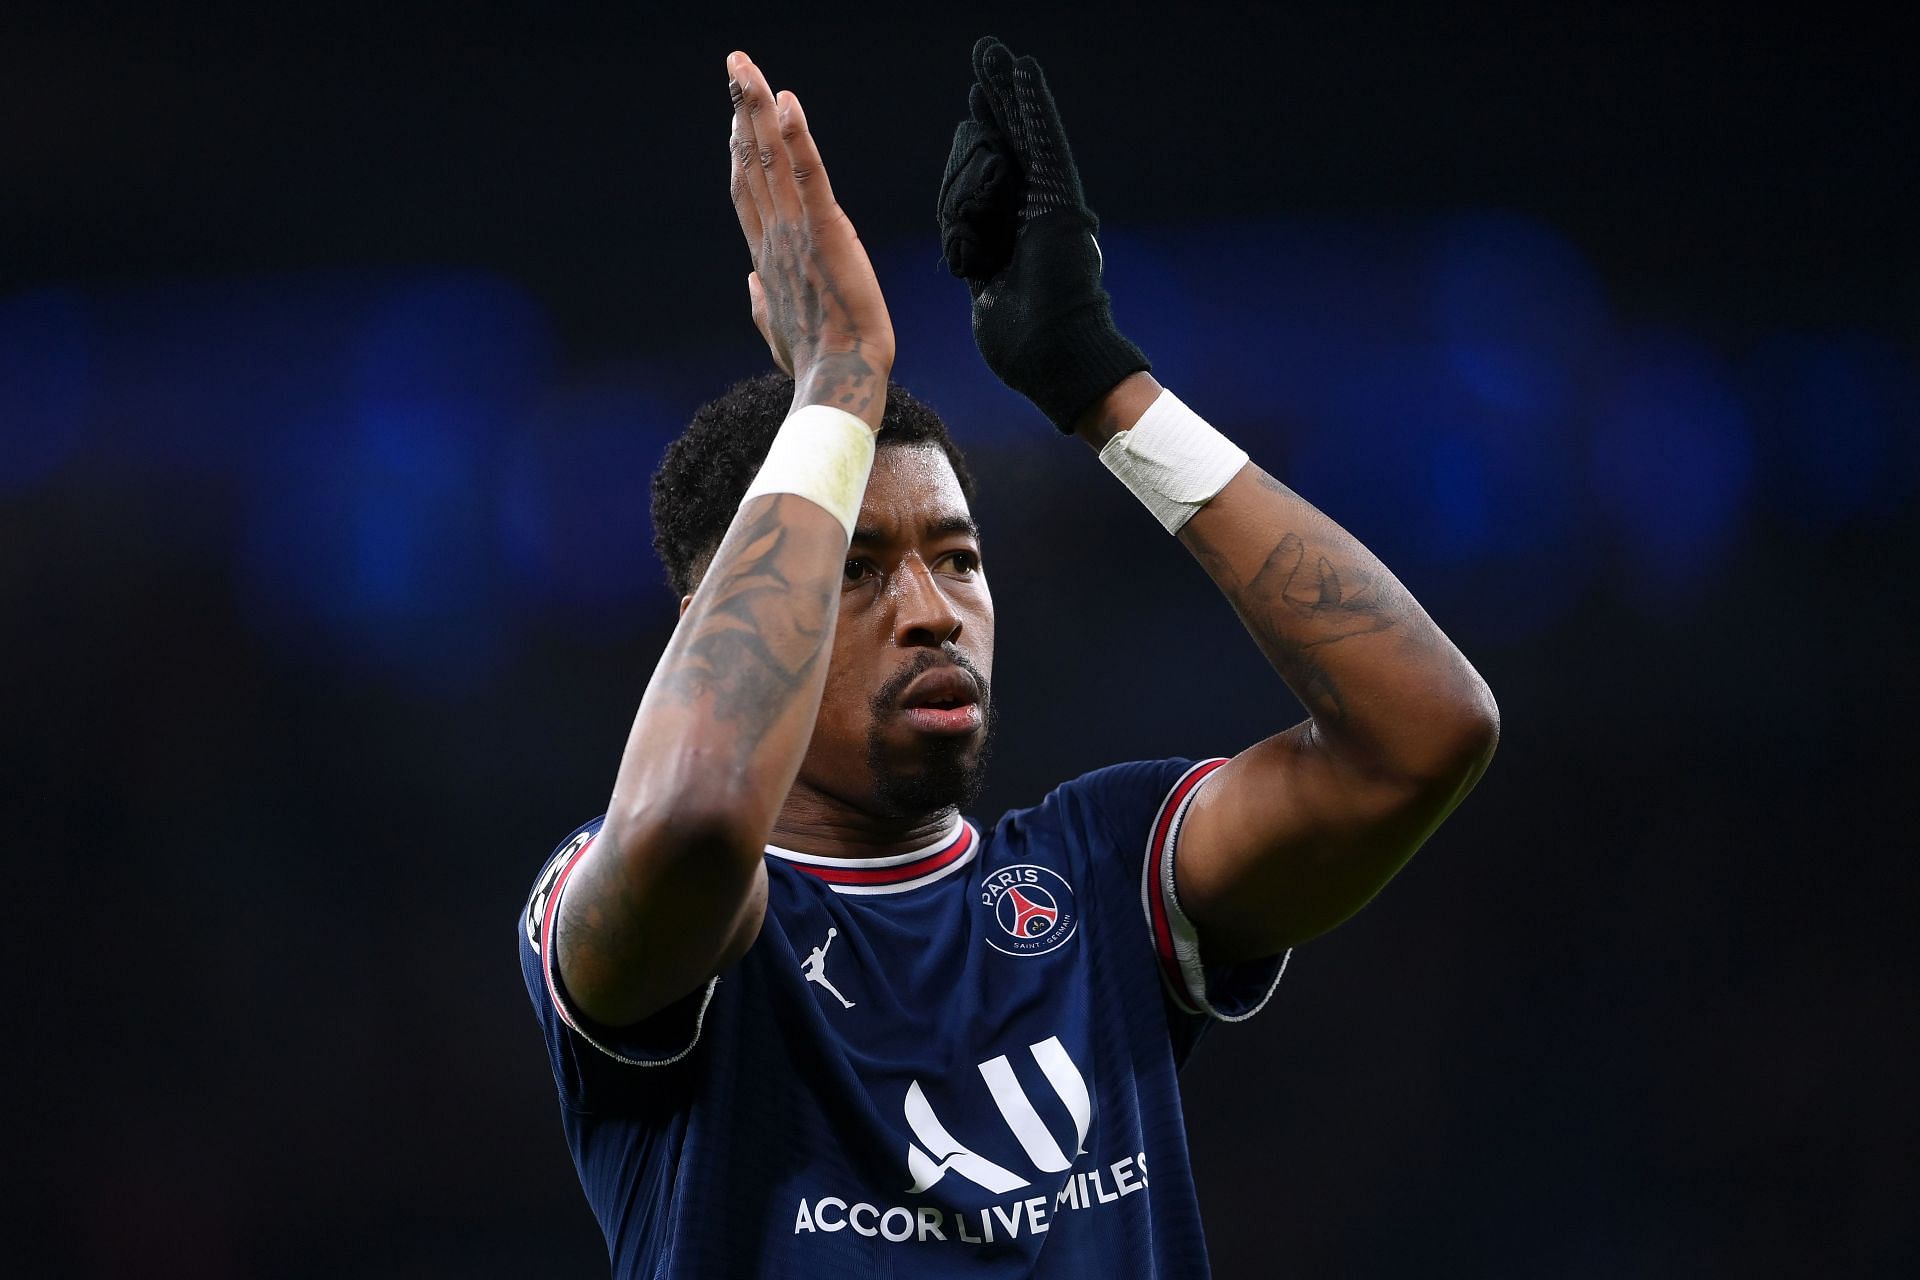 Presnel Kimpembe has admirers at Turin